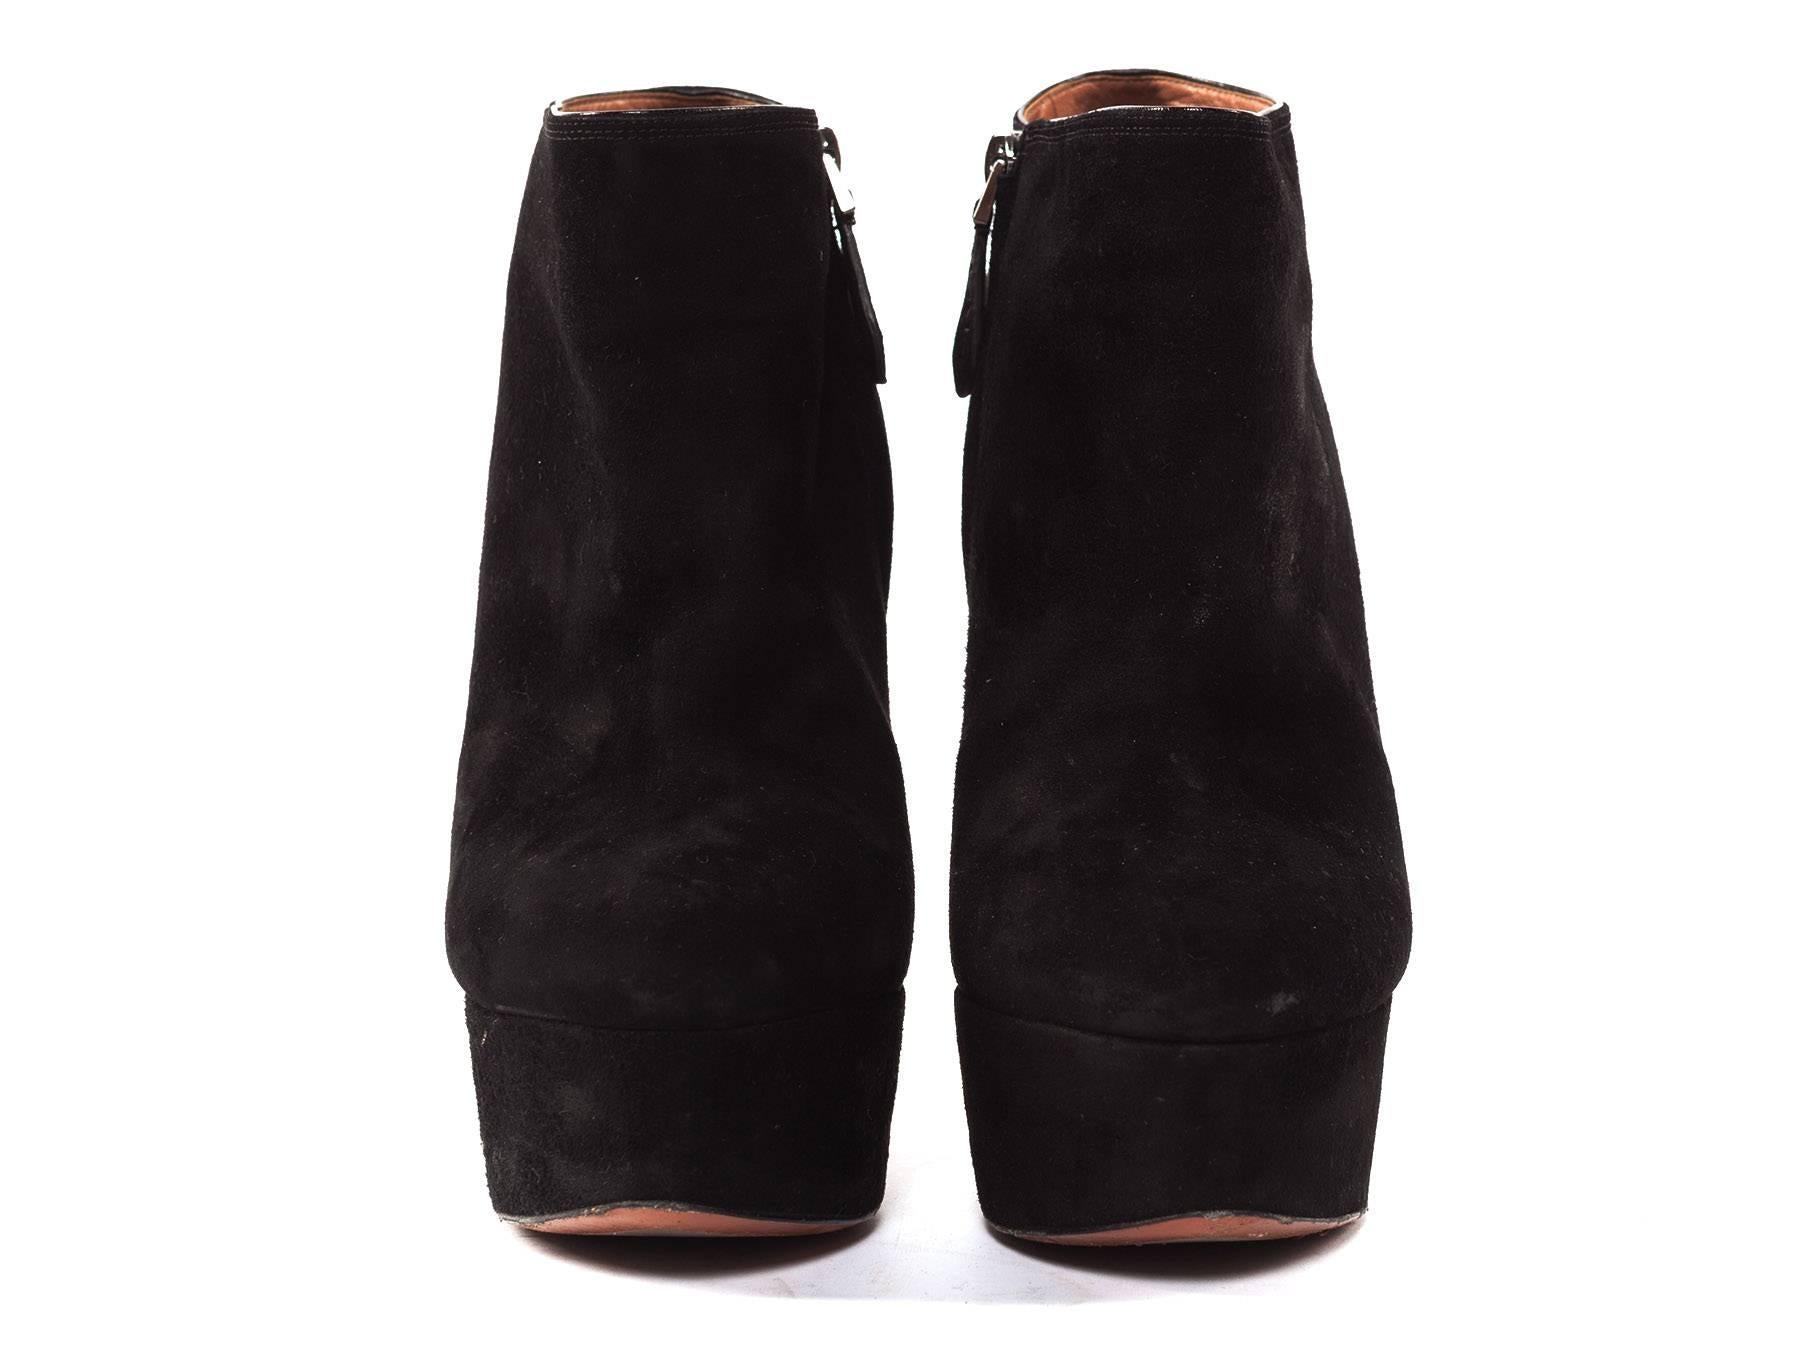  The classic shape from Alaia in a short boot version.